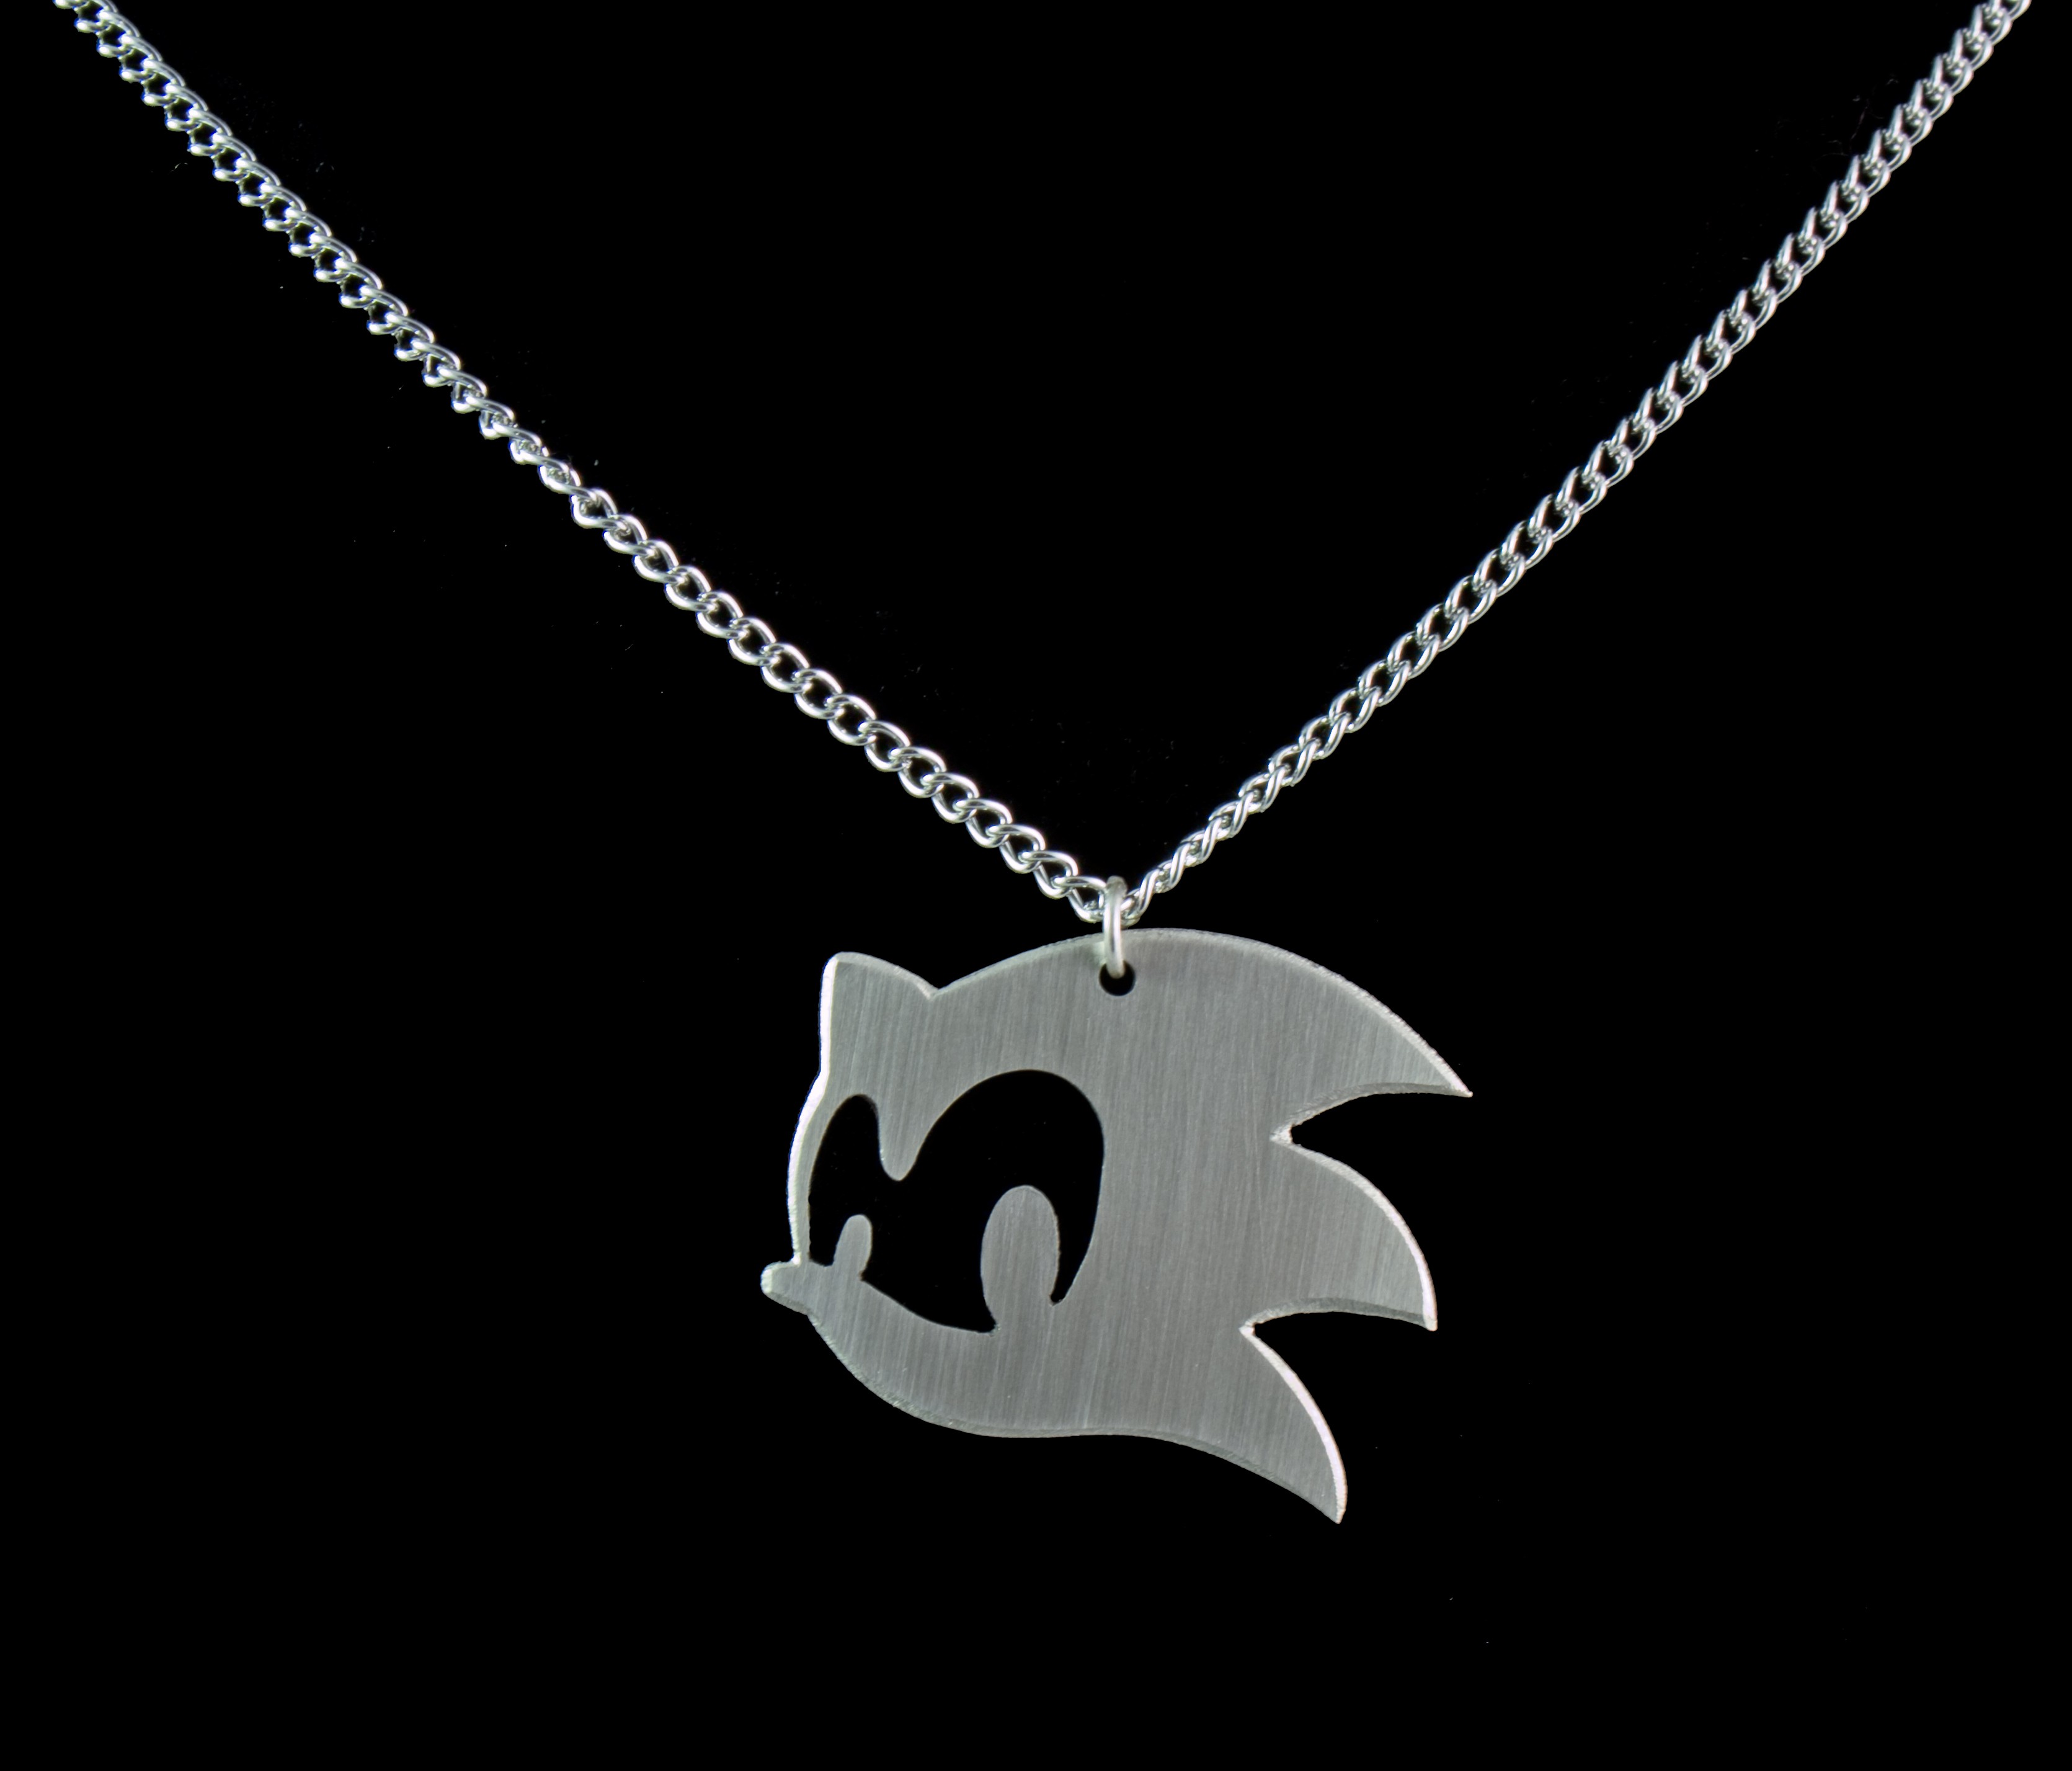 General 3341x2855 video games Sonic the Hedgehog chains necklace monochrome simple background video game characters